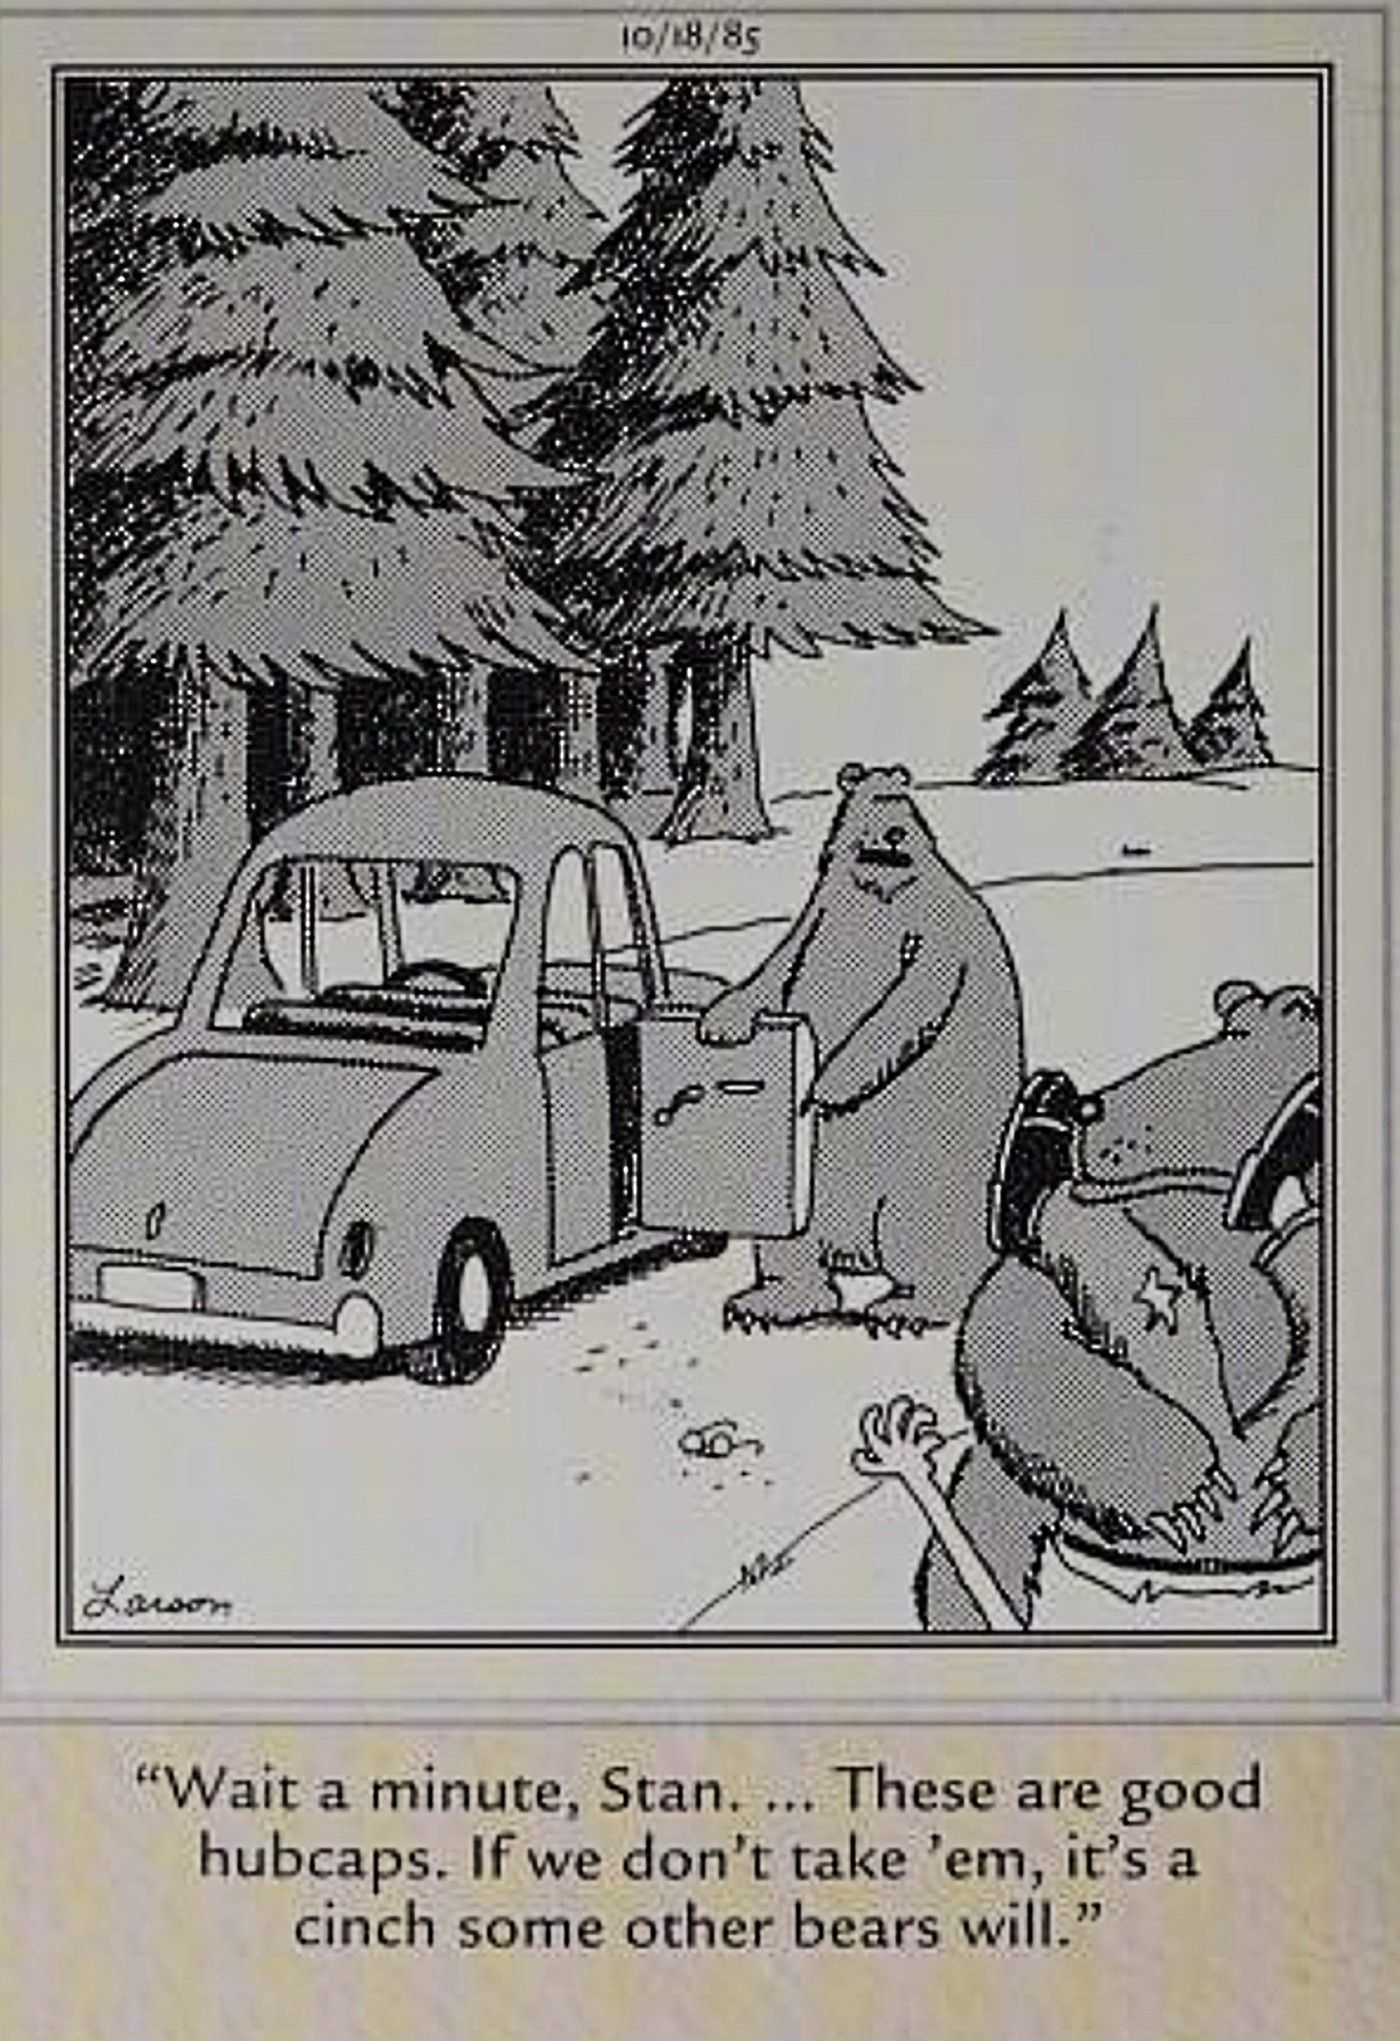 Far Side, bears discuss stealing hub caps off car after killing driver